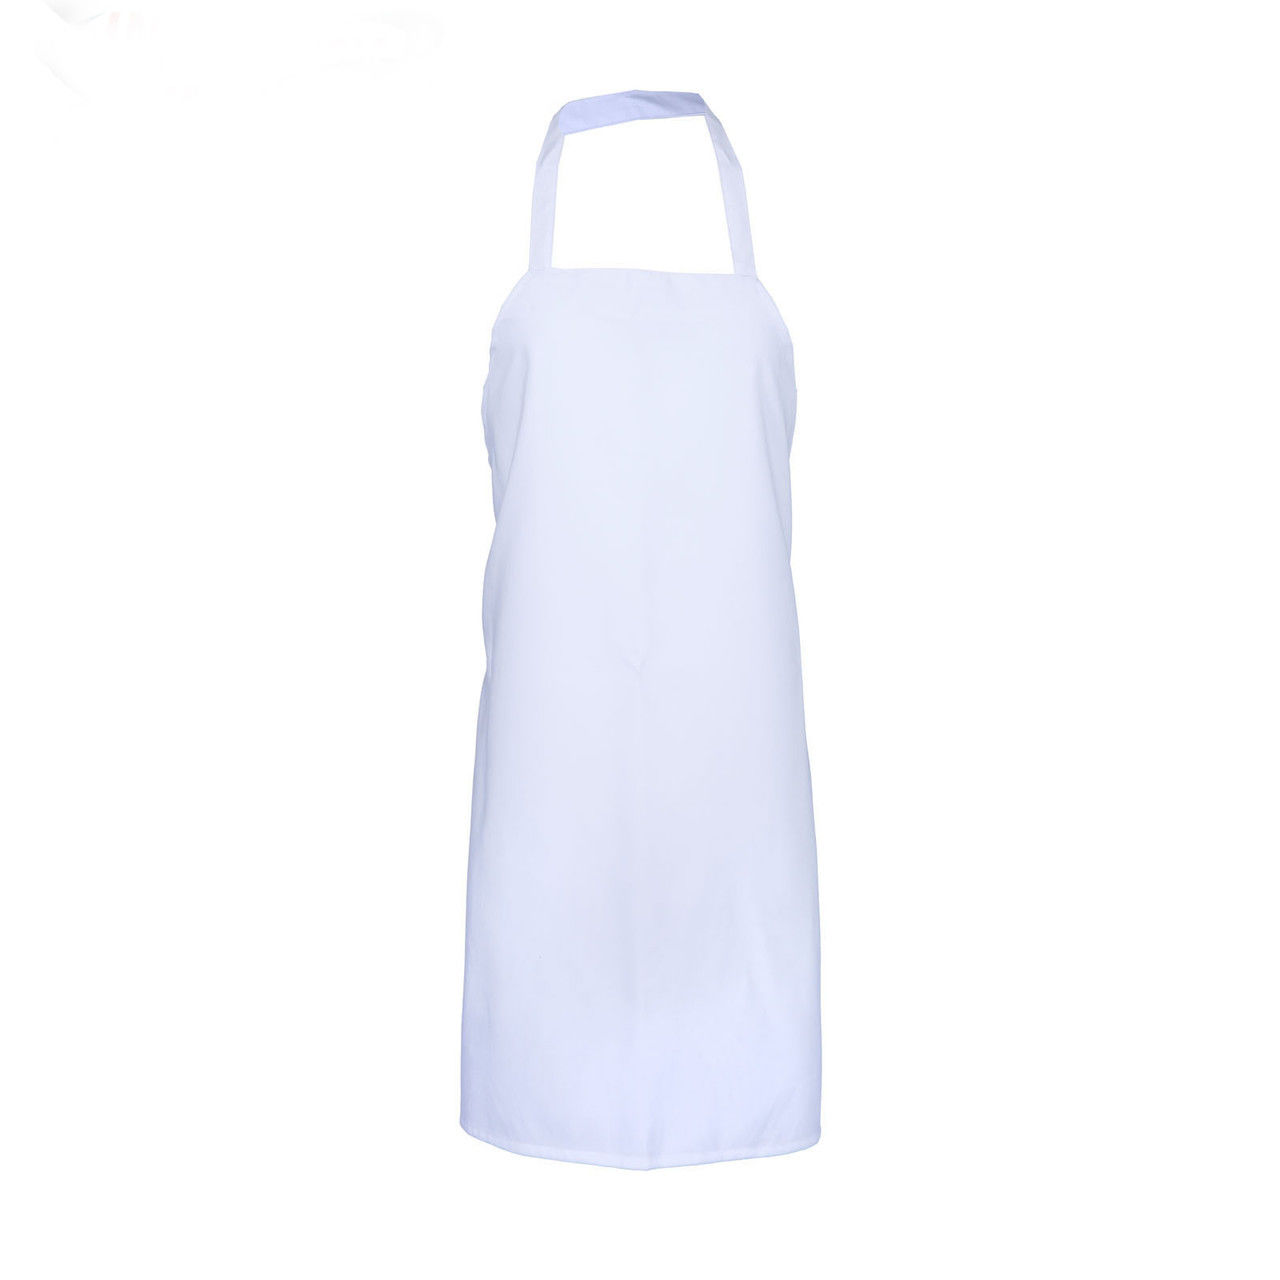 Where are the pinnacle aprons, like the Basic Bib, manufactured?